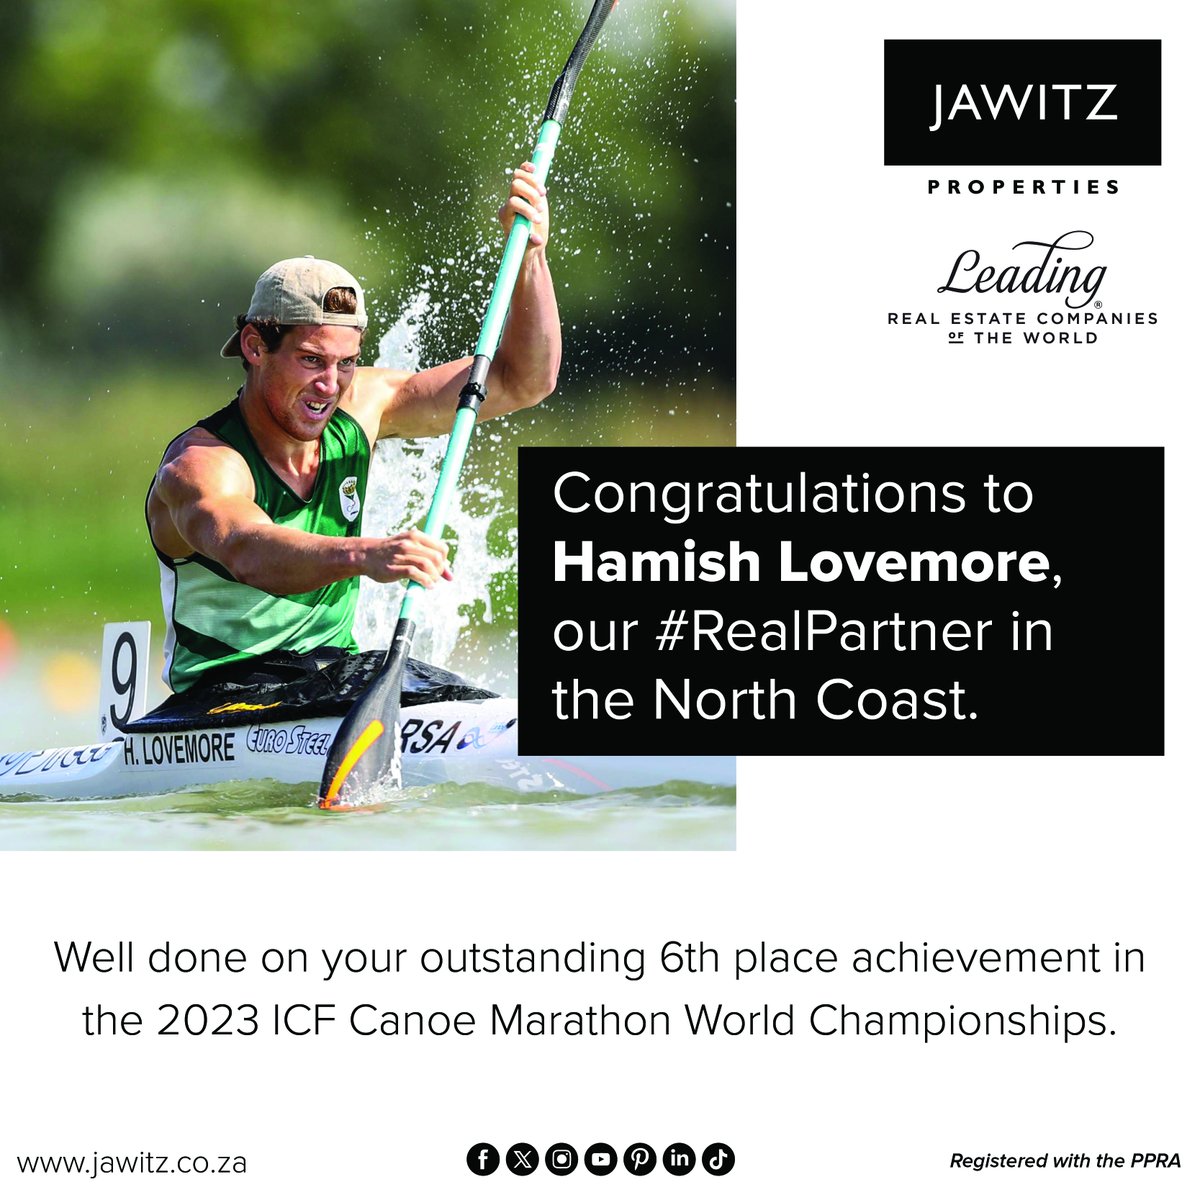 Congratulations to Hamish Lovemore, our #RealPartner at Jawitz Properties North Coast 🙌

Well done on your outstanding 6th place achievement in the 2023 ICF Canoe Marathon World Championships 👊

#Jawitz